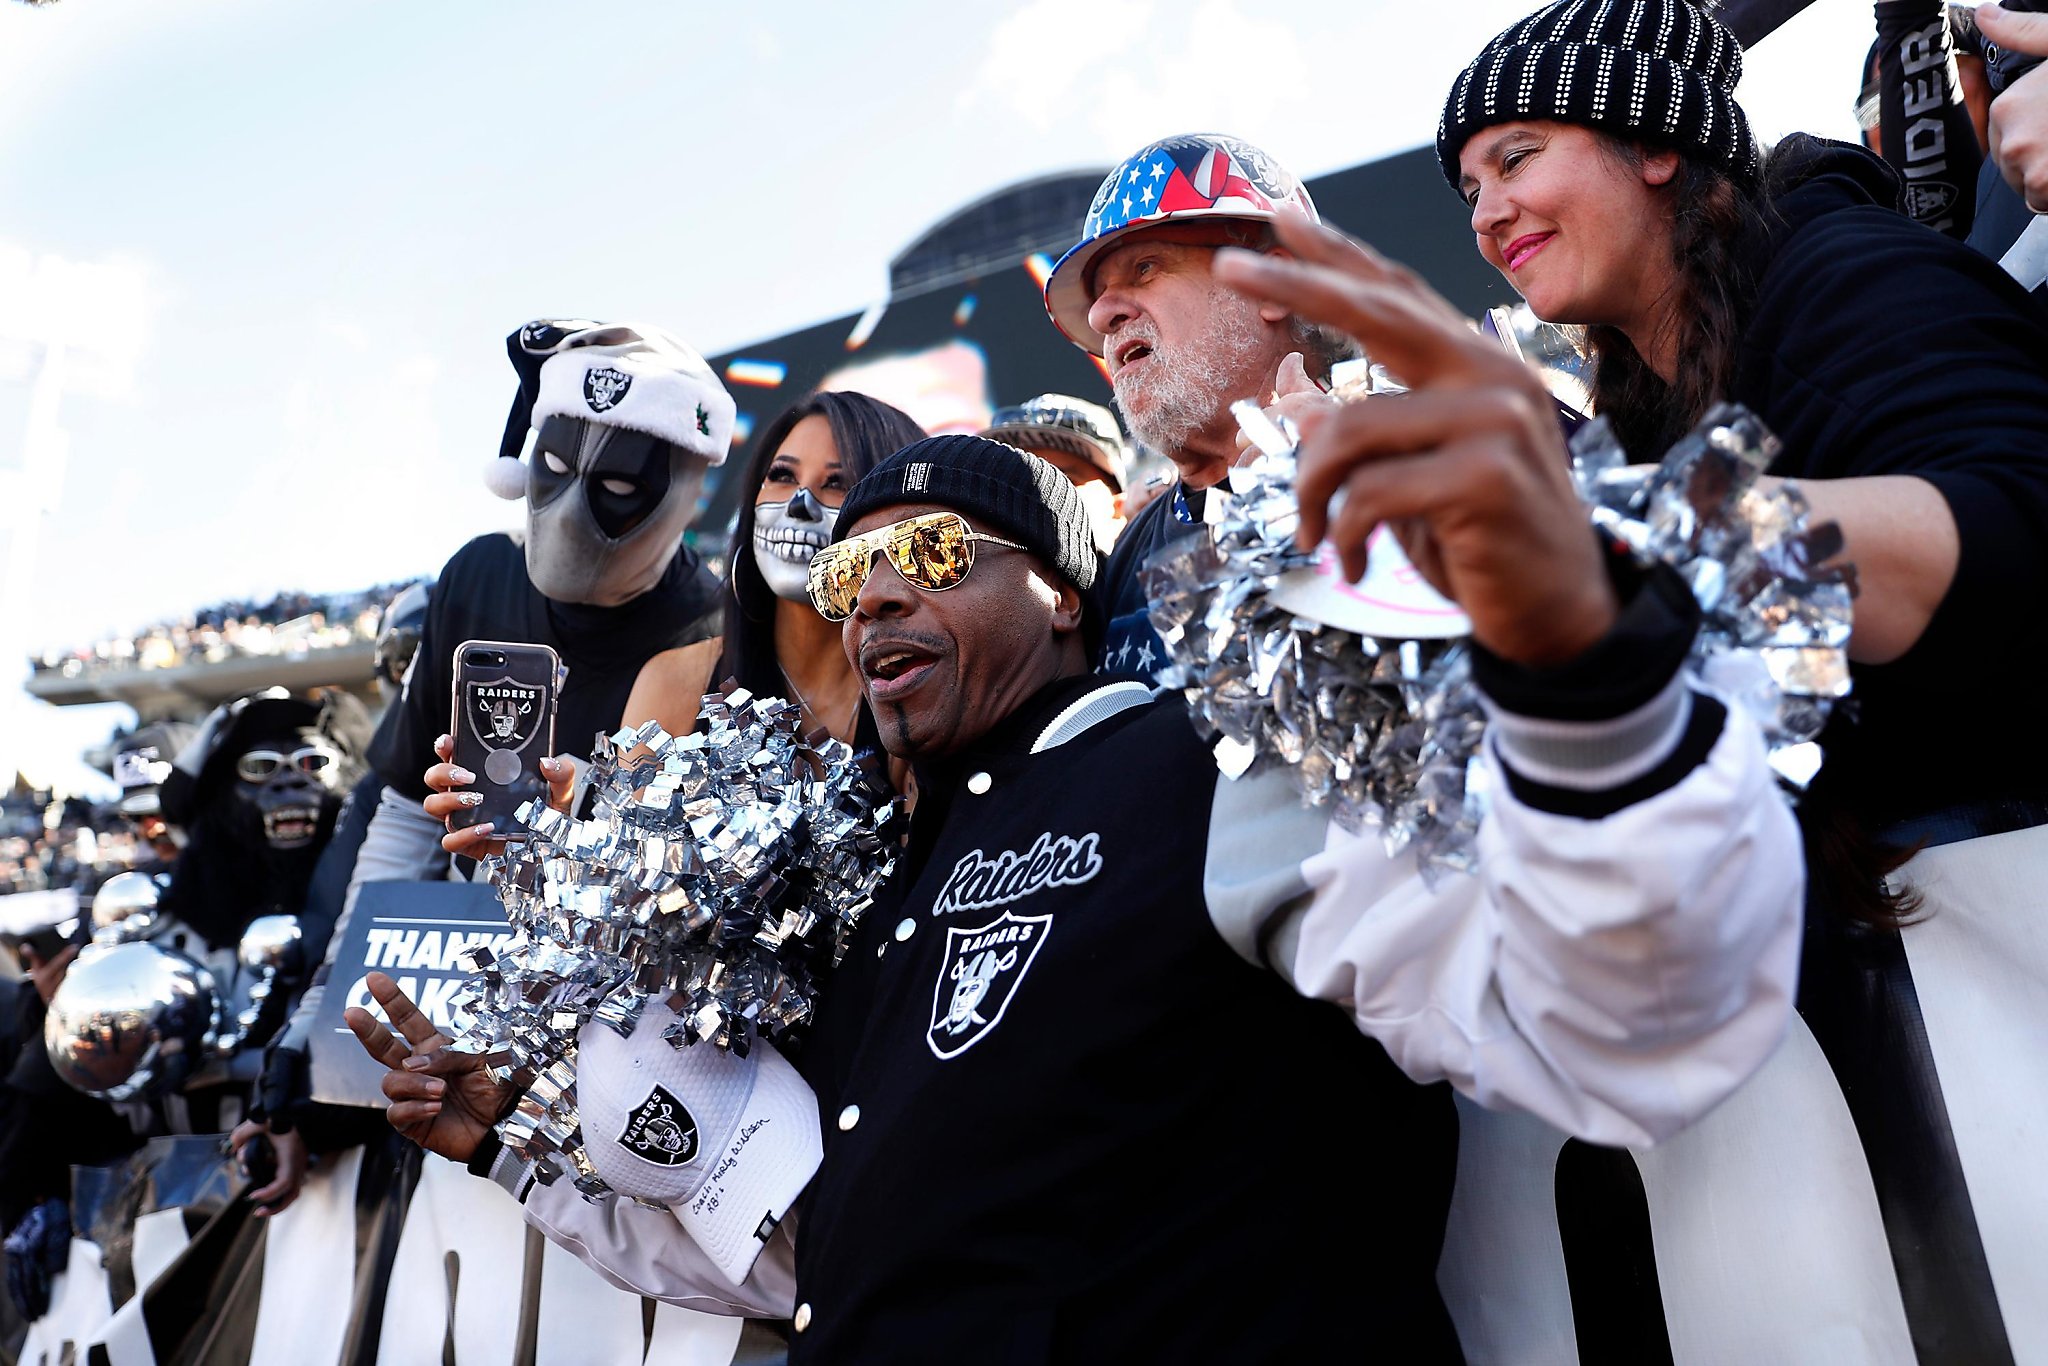 Raiders fans suing to keep name, colors in Oakland, and they'll